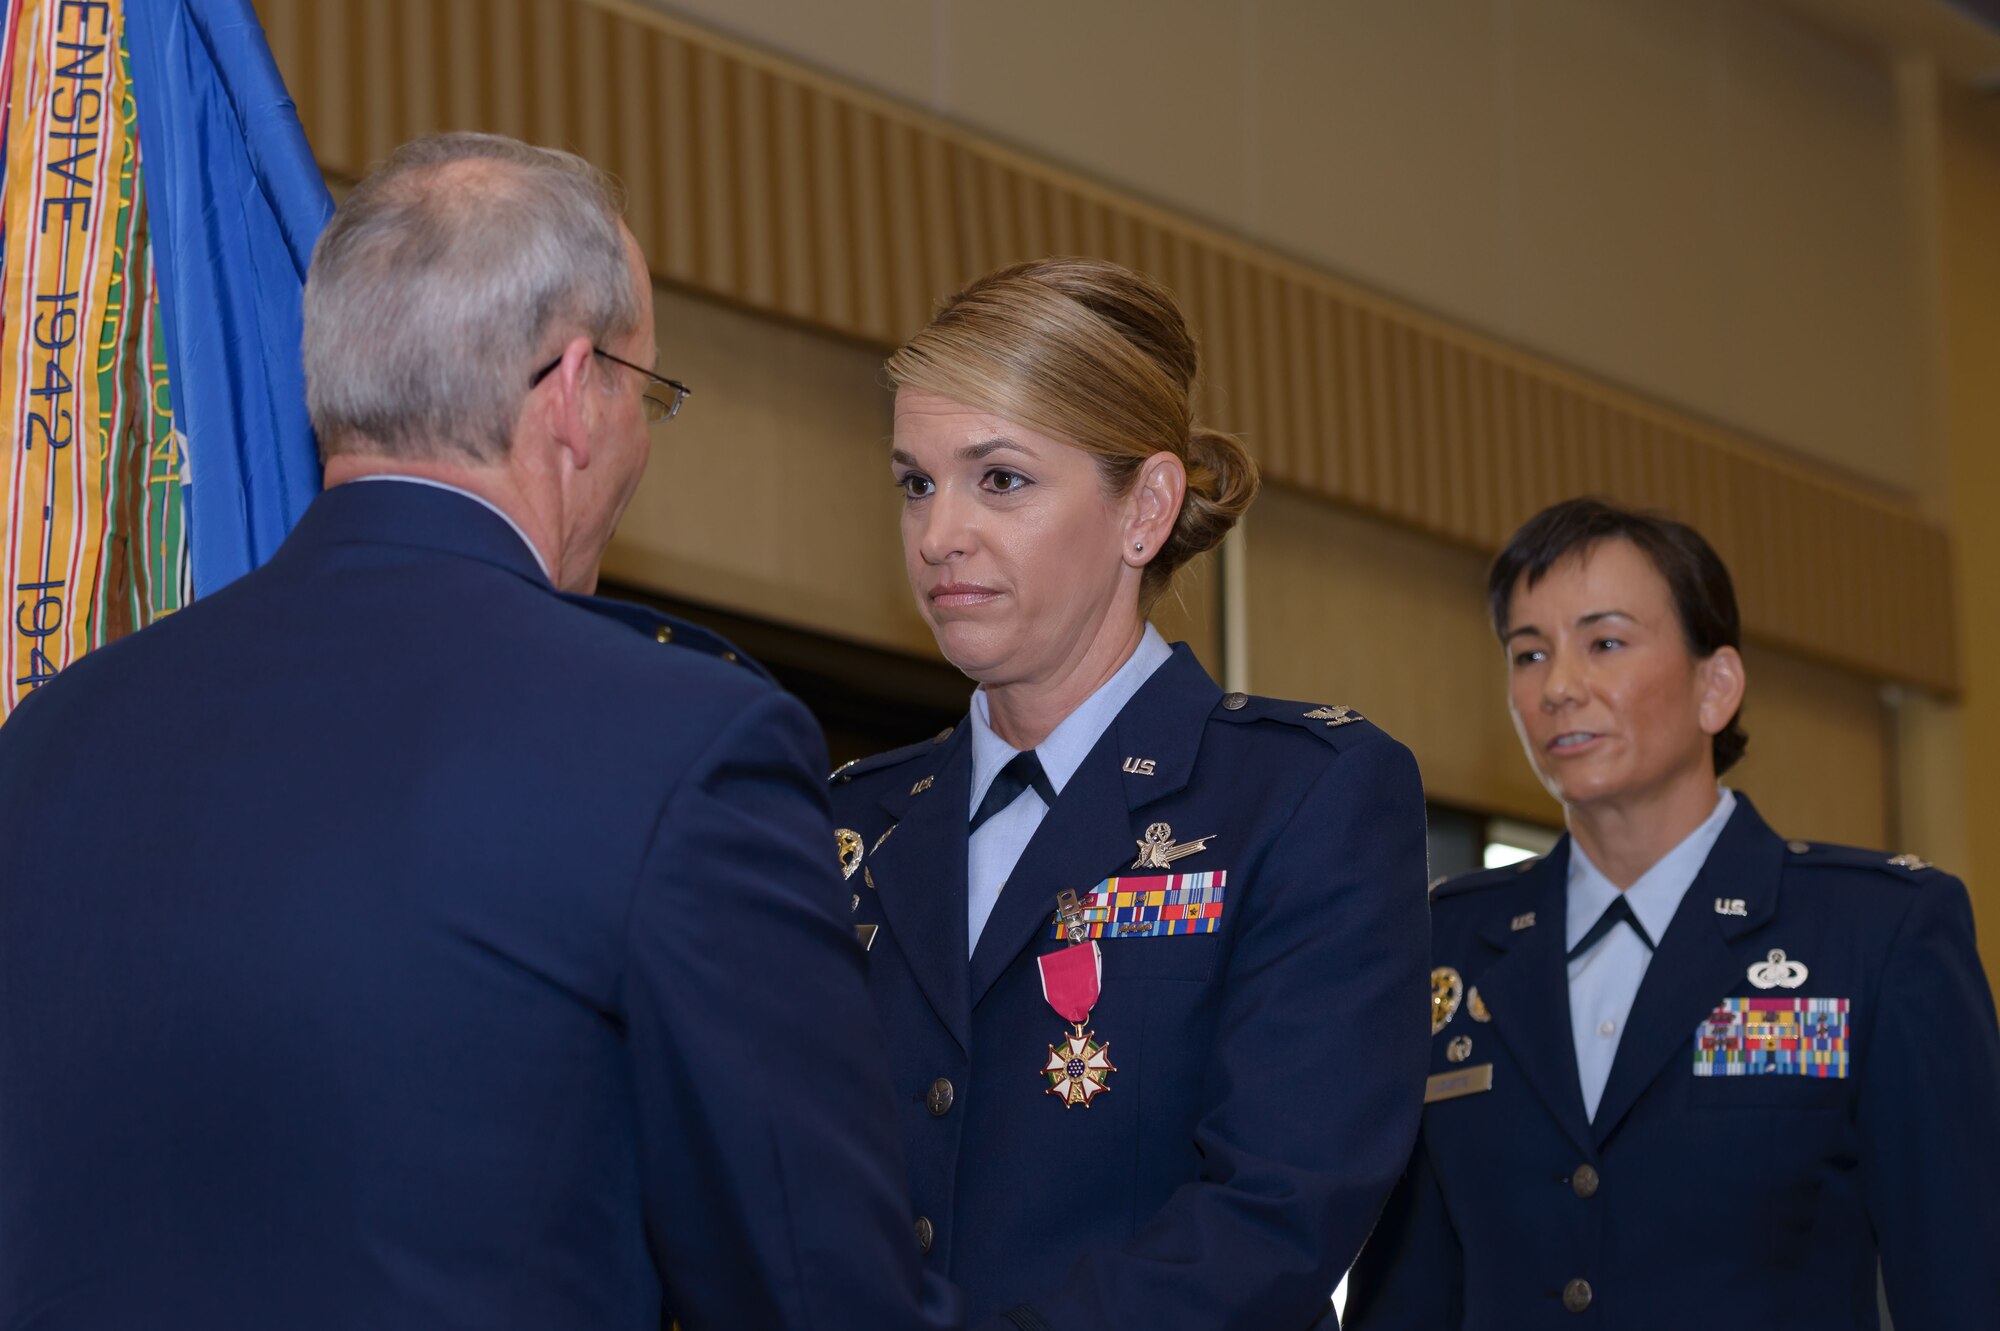 Maj. Gen. Bob LaBrutta, 2nd Air Force commander, takes the guidon from Col. Michele Edmondson, outgoing 81st Training Wing commander, during a change of command ceremony at the Bay Breeze Event Center June 2, 2017, on Keesler Air Force Base, Miss. The ceremony is a symbol of command being exchanged from one commander to the next. Edmondson is now assigned to be the executive officer to the vice chief of staff of the Air Force at the Pentagon in Washington D.C. (U.S. Air Force photo by André Askew) 